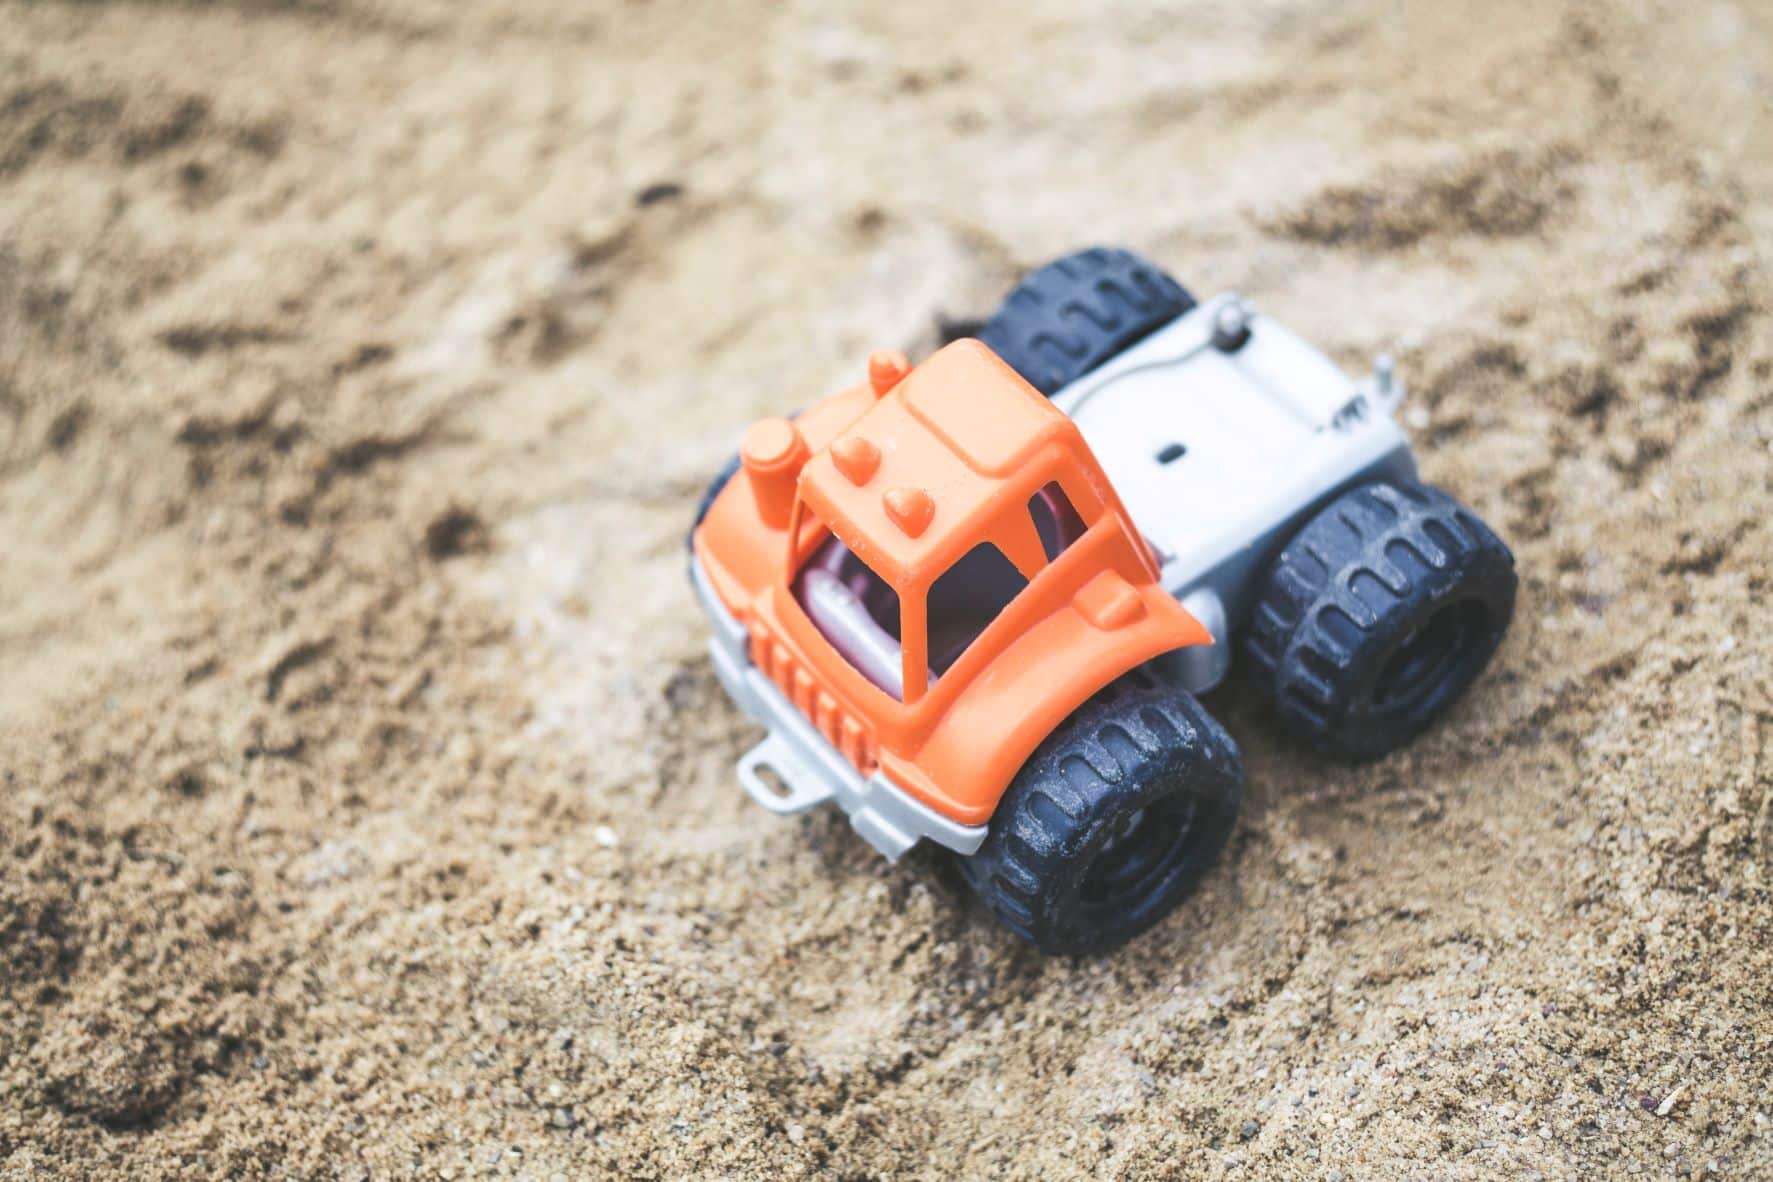 Rev Up the Fun: Exploring the World of Toy Vehicles